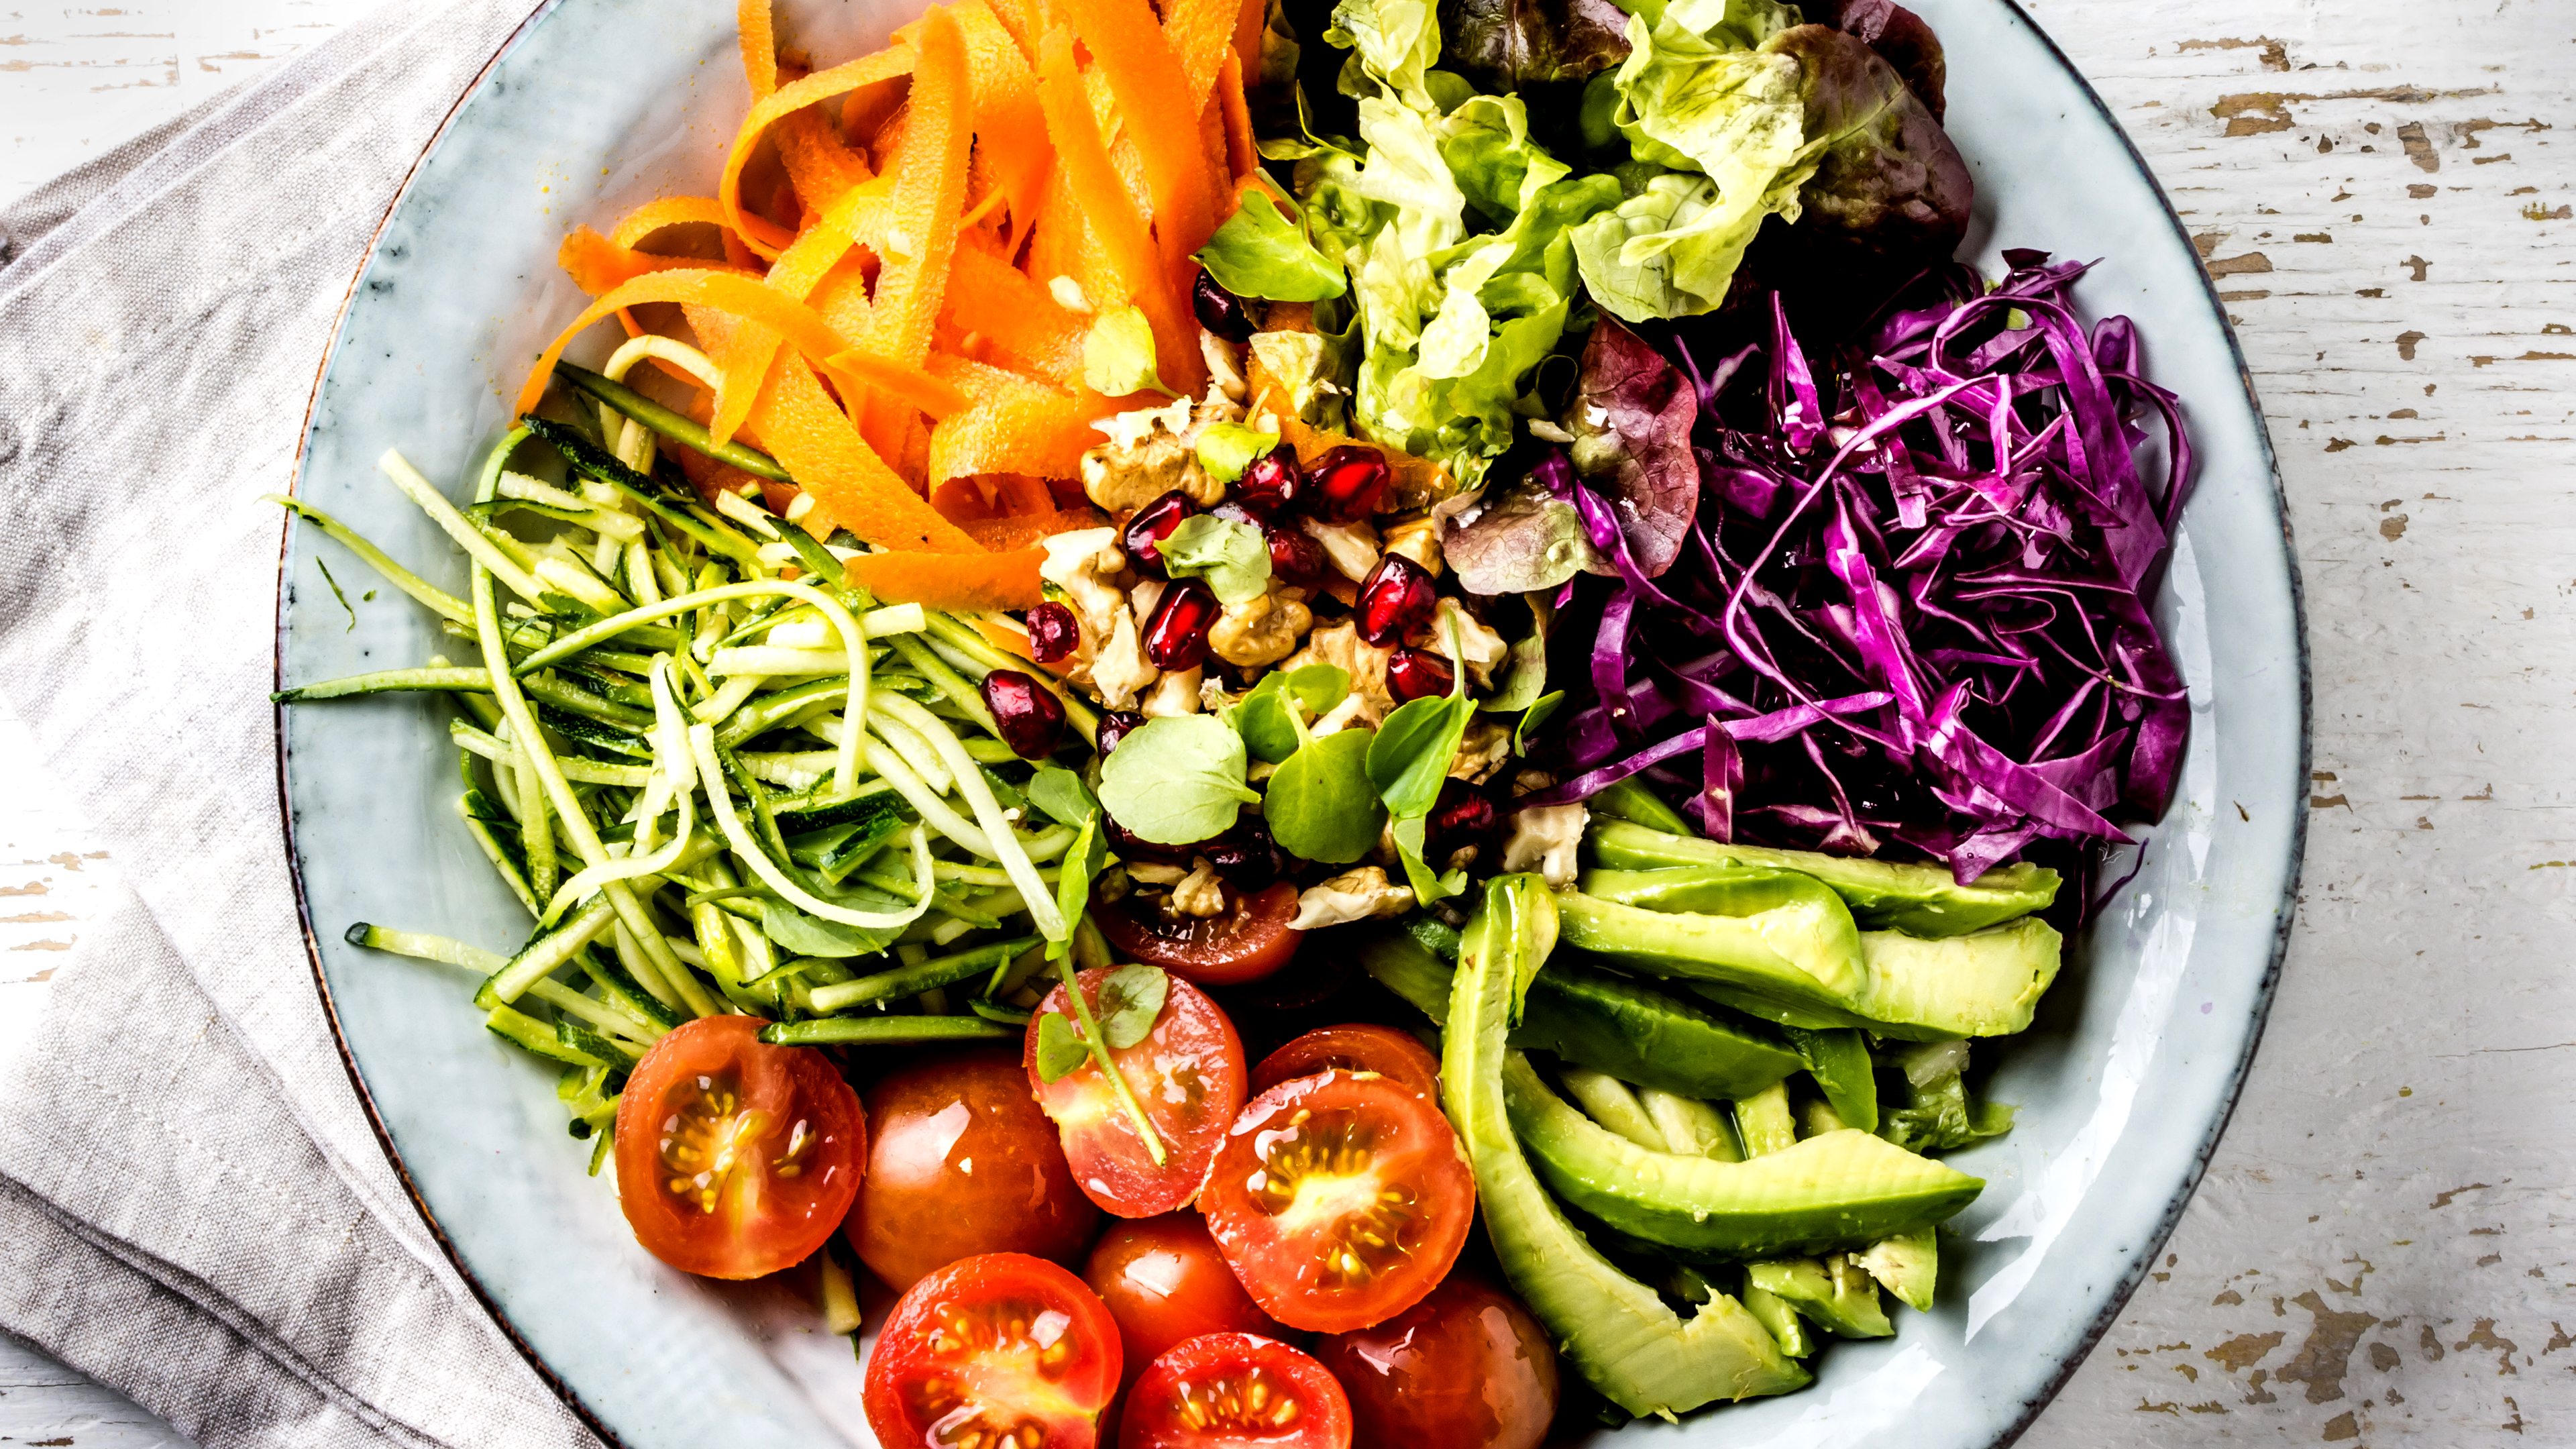 Vegan buddha bowl. Bowl with fresh raw vegetables - cabbage, carrot, zucchini, lettuce, watercress salad, tomatoes cherry and avocado, nuts and pomegranate on white background